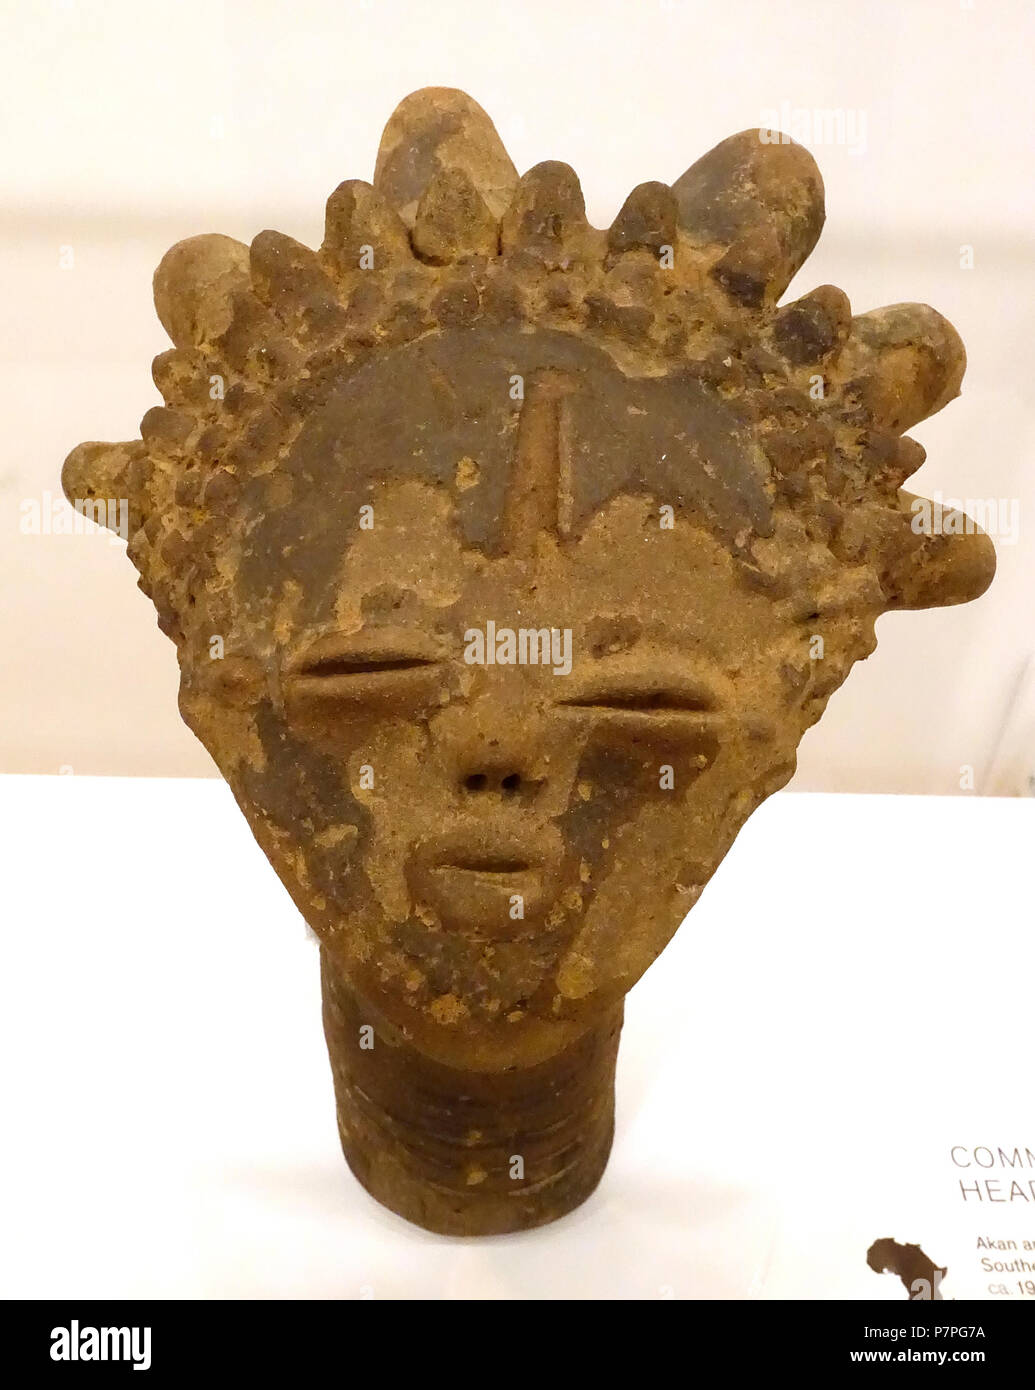 English: Exhibit in the Krannert Art Museum, University of Illinois at Urbana-Champaign - Urbana-Champaign, Illinois, USA. This work is old enough so that it is in the . 15 June 2015, 11:59:33 96 Commemorative head, Akan people, Southern Ghana, c. 19th century, terracotta - Krannert Art Museum, UIUC - DSC06174 Stock Photo